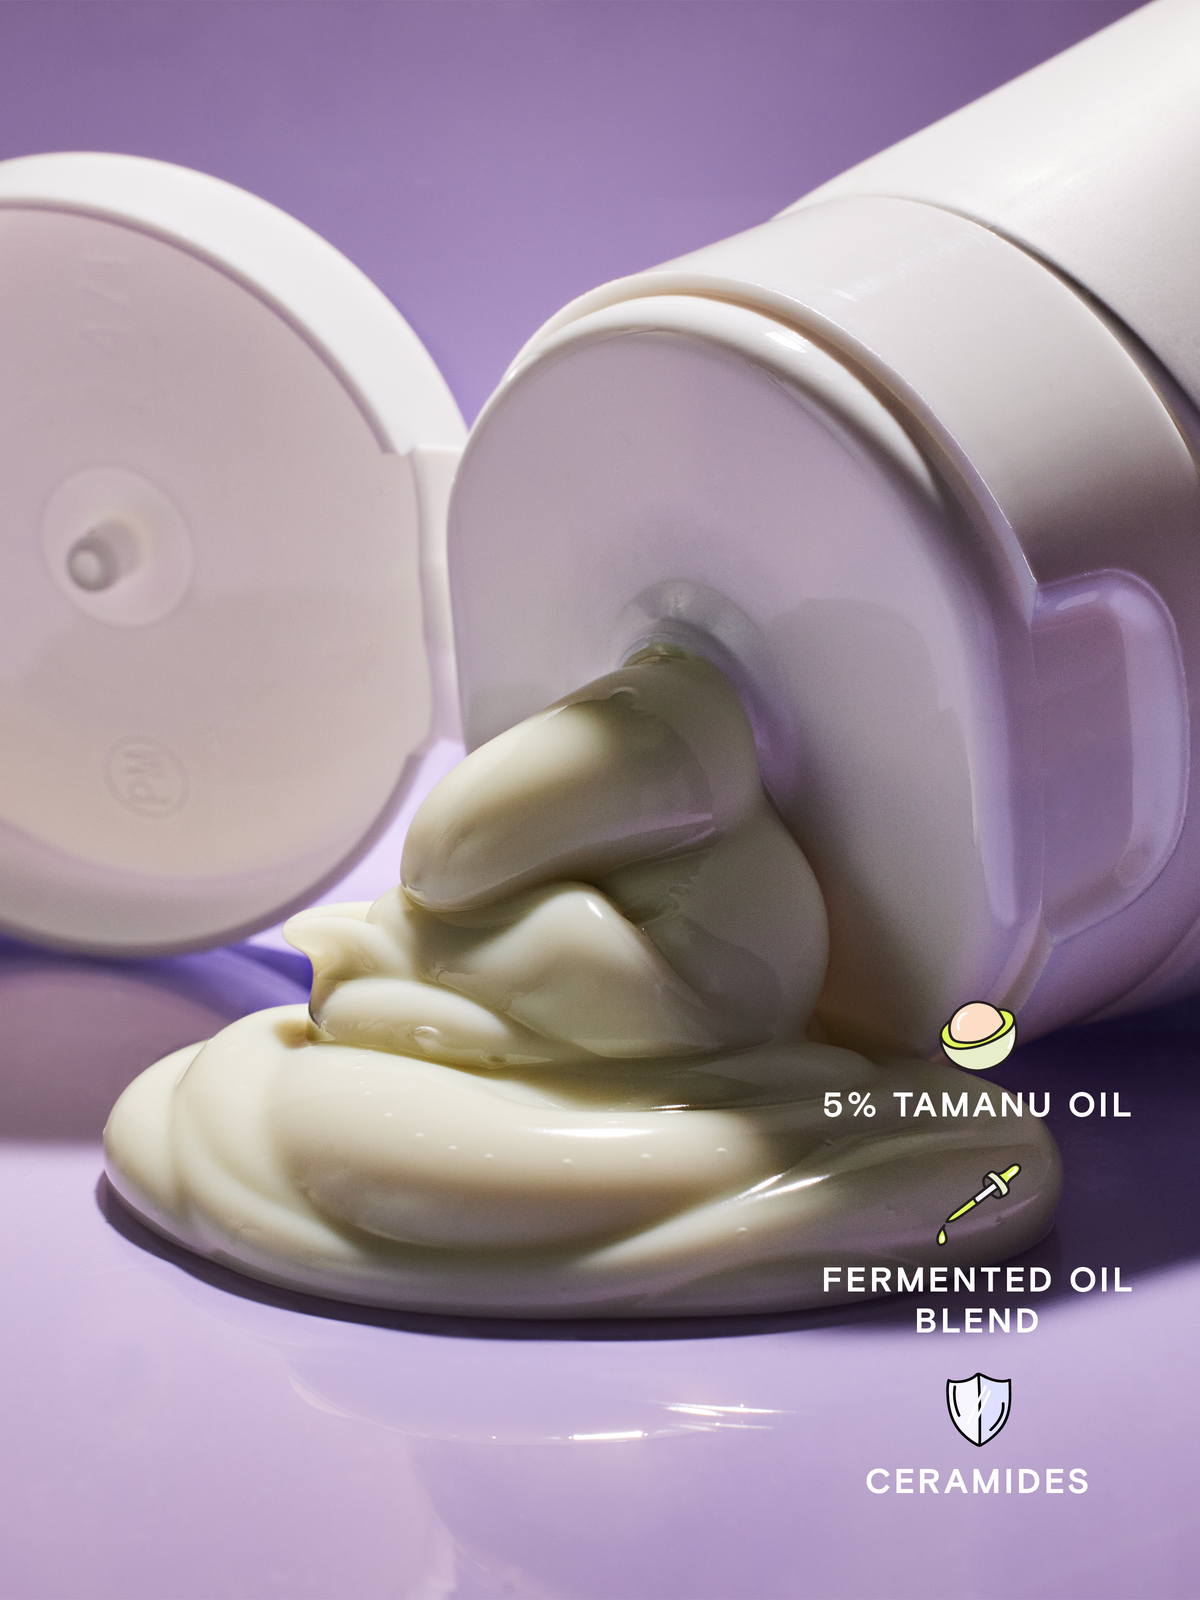 Great Body Relief is made of 5% Tamanu Oil, has a Fermented Oil Blend, and Ceramides.